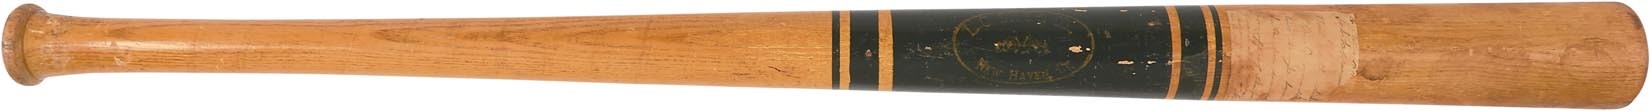 - 1880s L.C. Dole Ring Bat w/Earliest Known Use of the Term "Memorabilia" (Samuel M. Chase Collection)